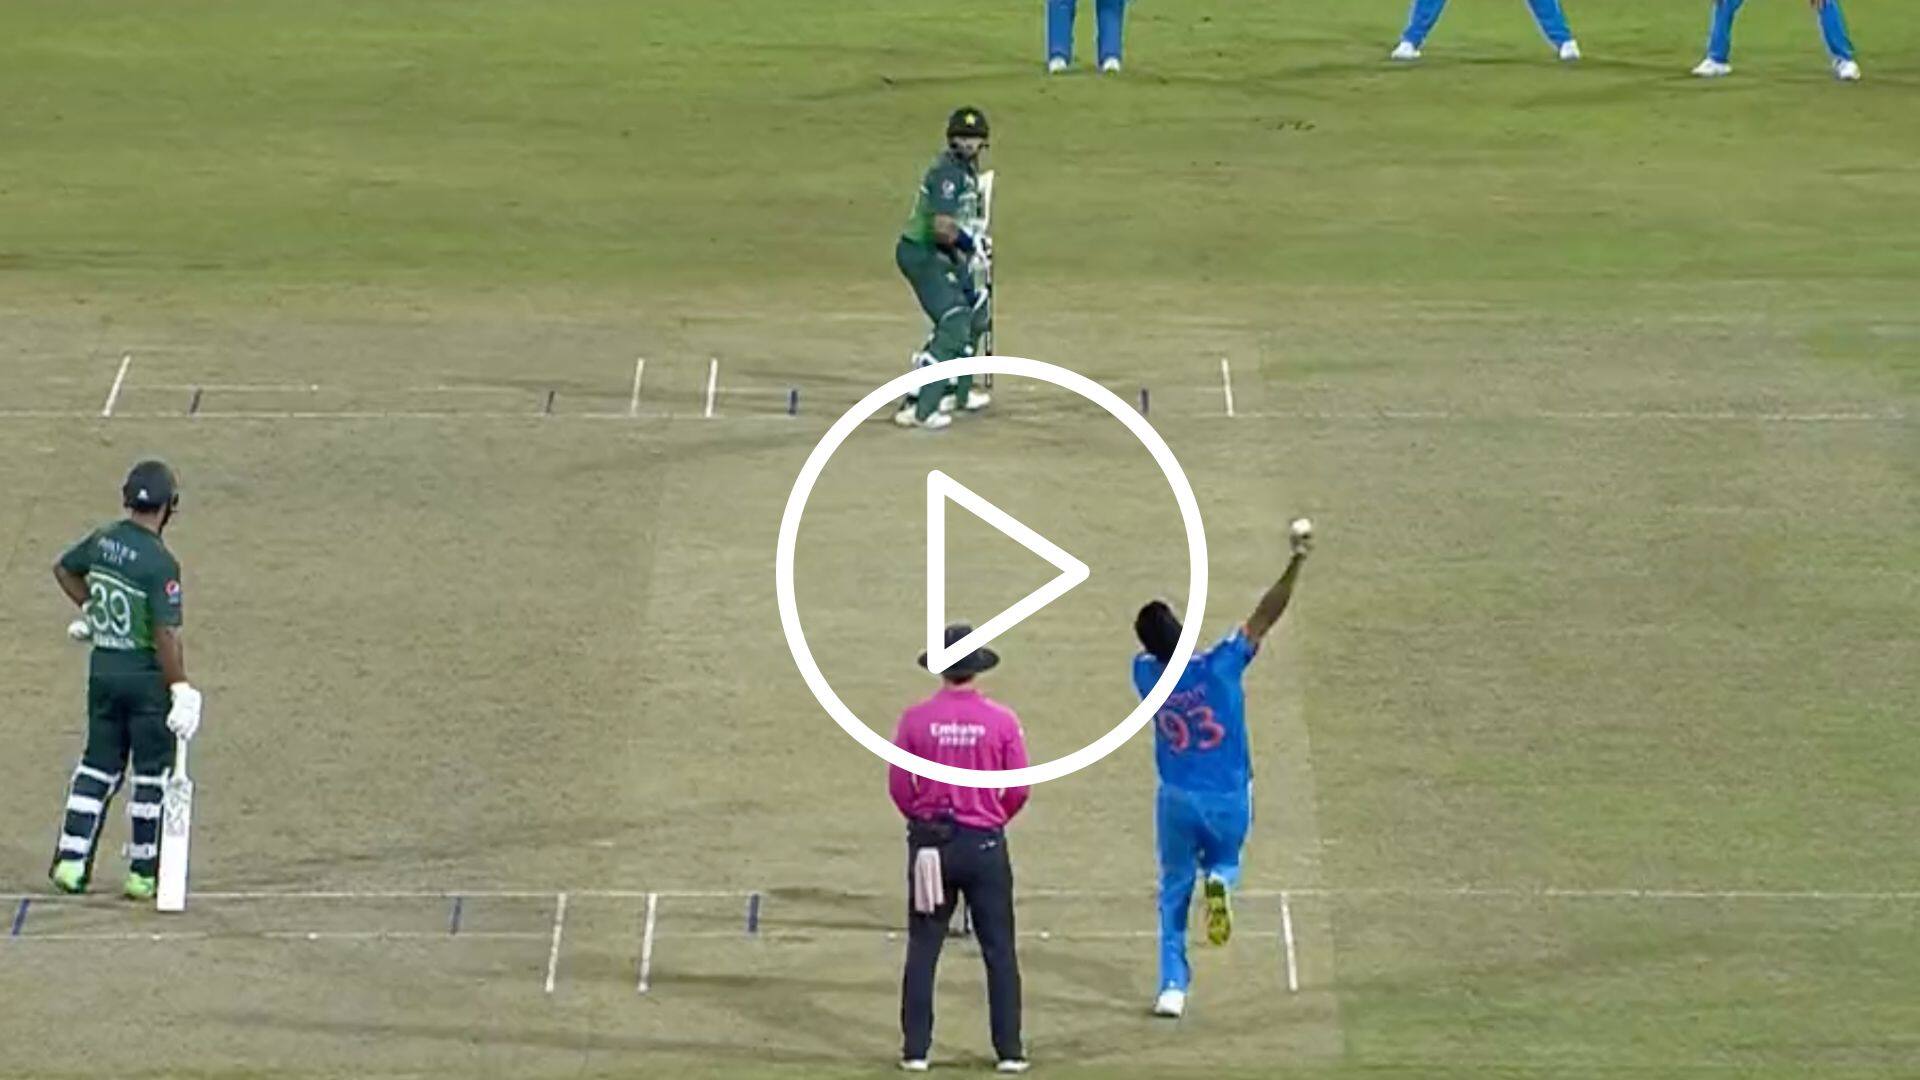 [Watch] Jasprit Bumrah Dismisses Imam-ul-Haq With an Unplayable Delivery